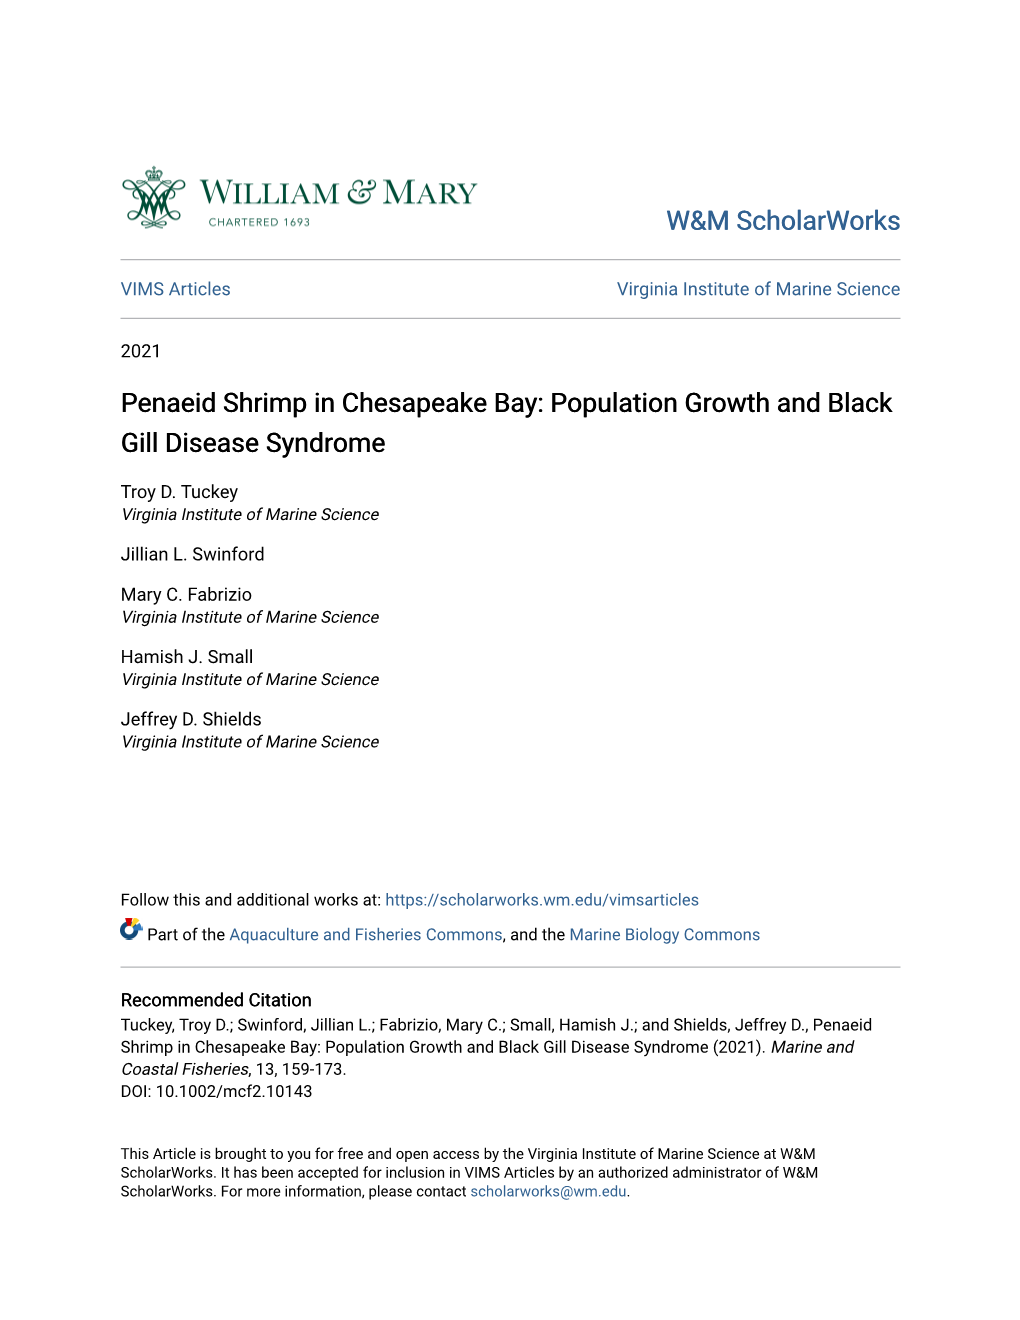 Penaeid Shrimp in Chesapeake Bay: Population Growth and Black Gill Disease Syndrome